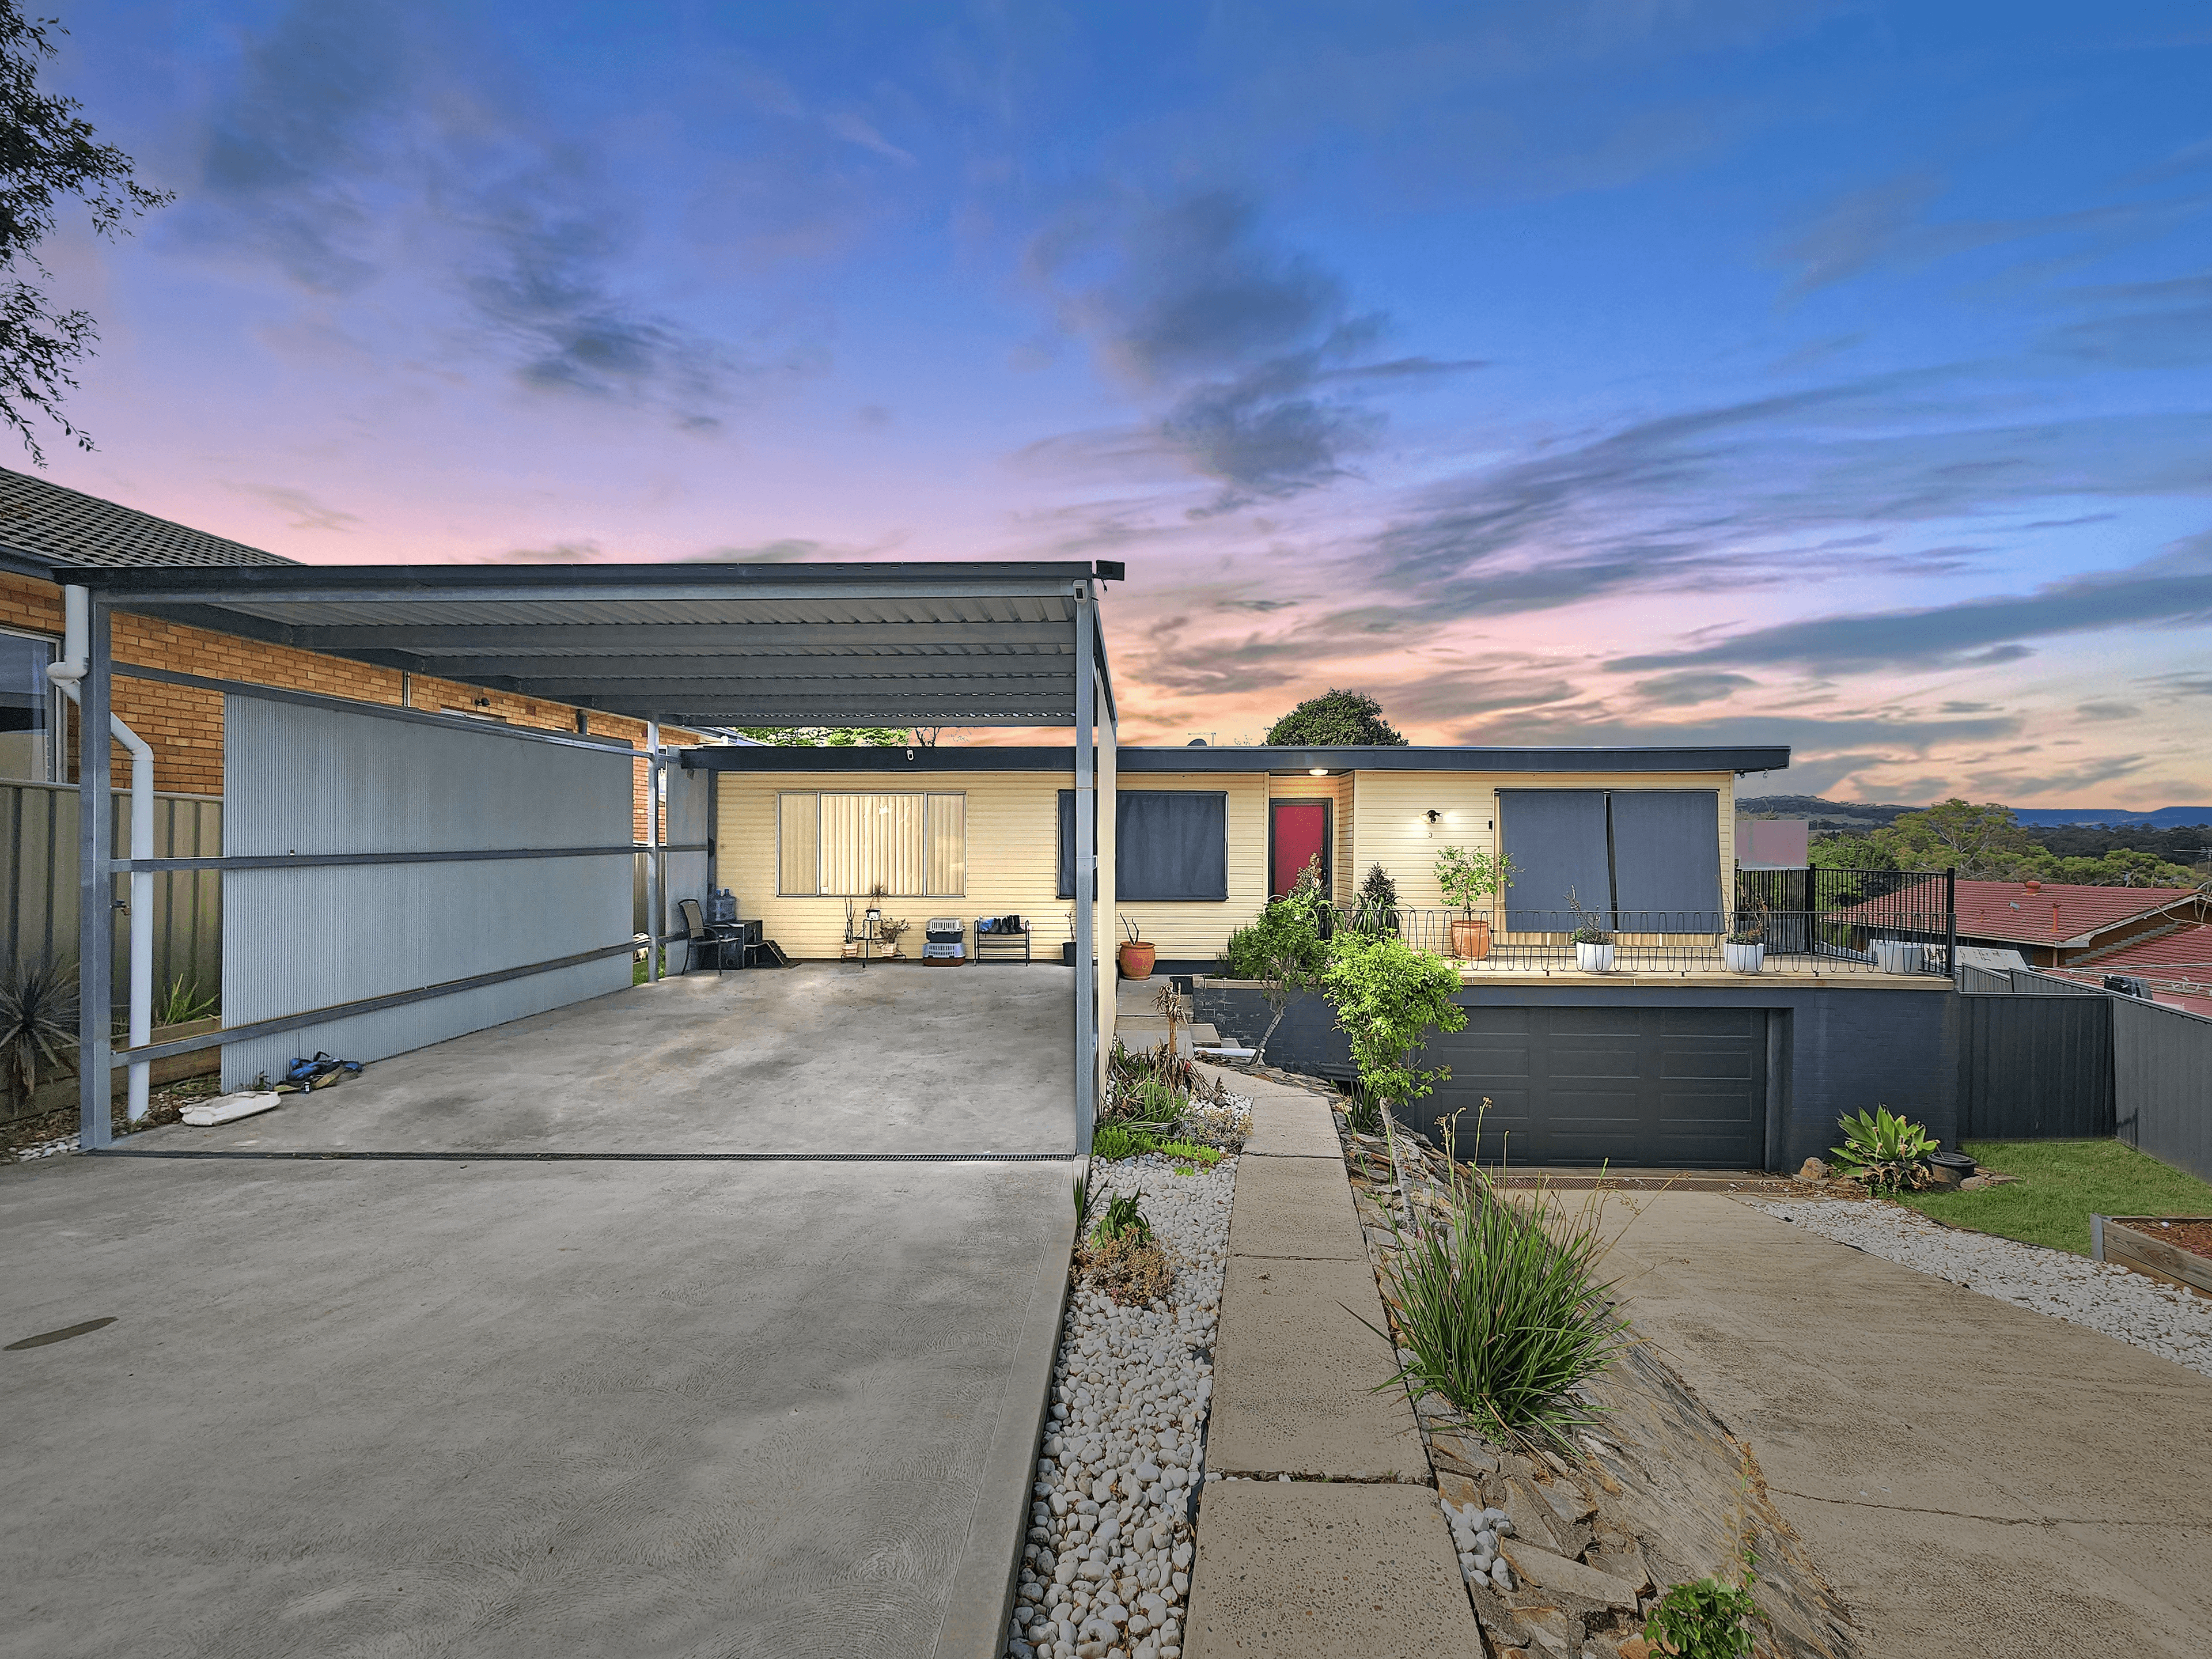 3 Ruth White Avenue, Muswellbrook, NSW 2333